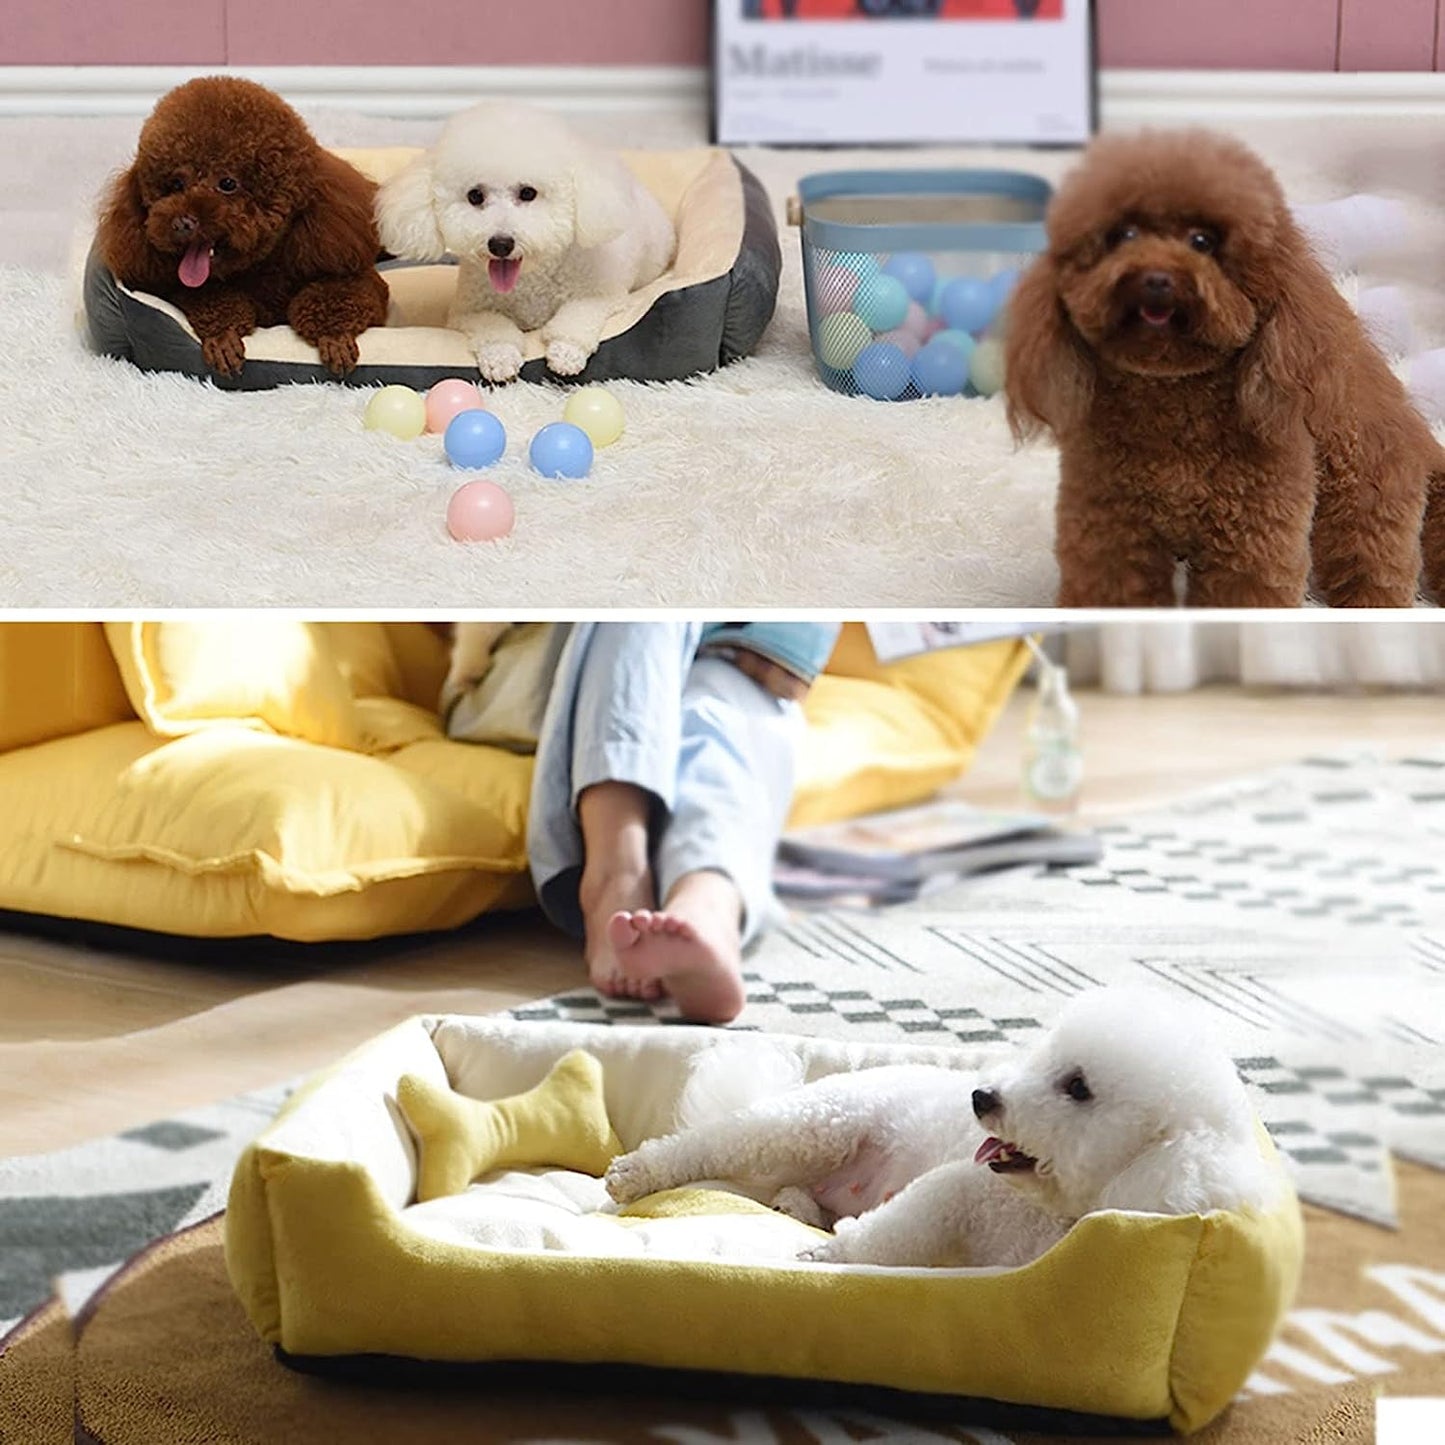 Super Soft Dog Beds Waterproof Bottom - Warm Bed For Dog & Cat - Cream and Red